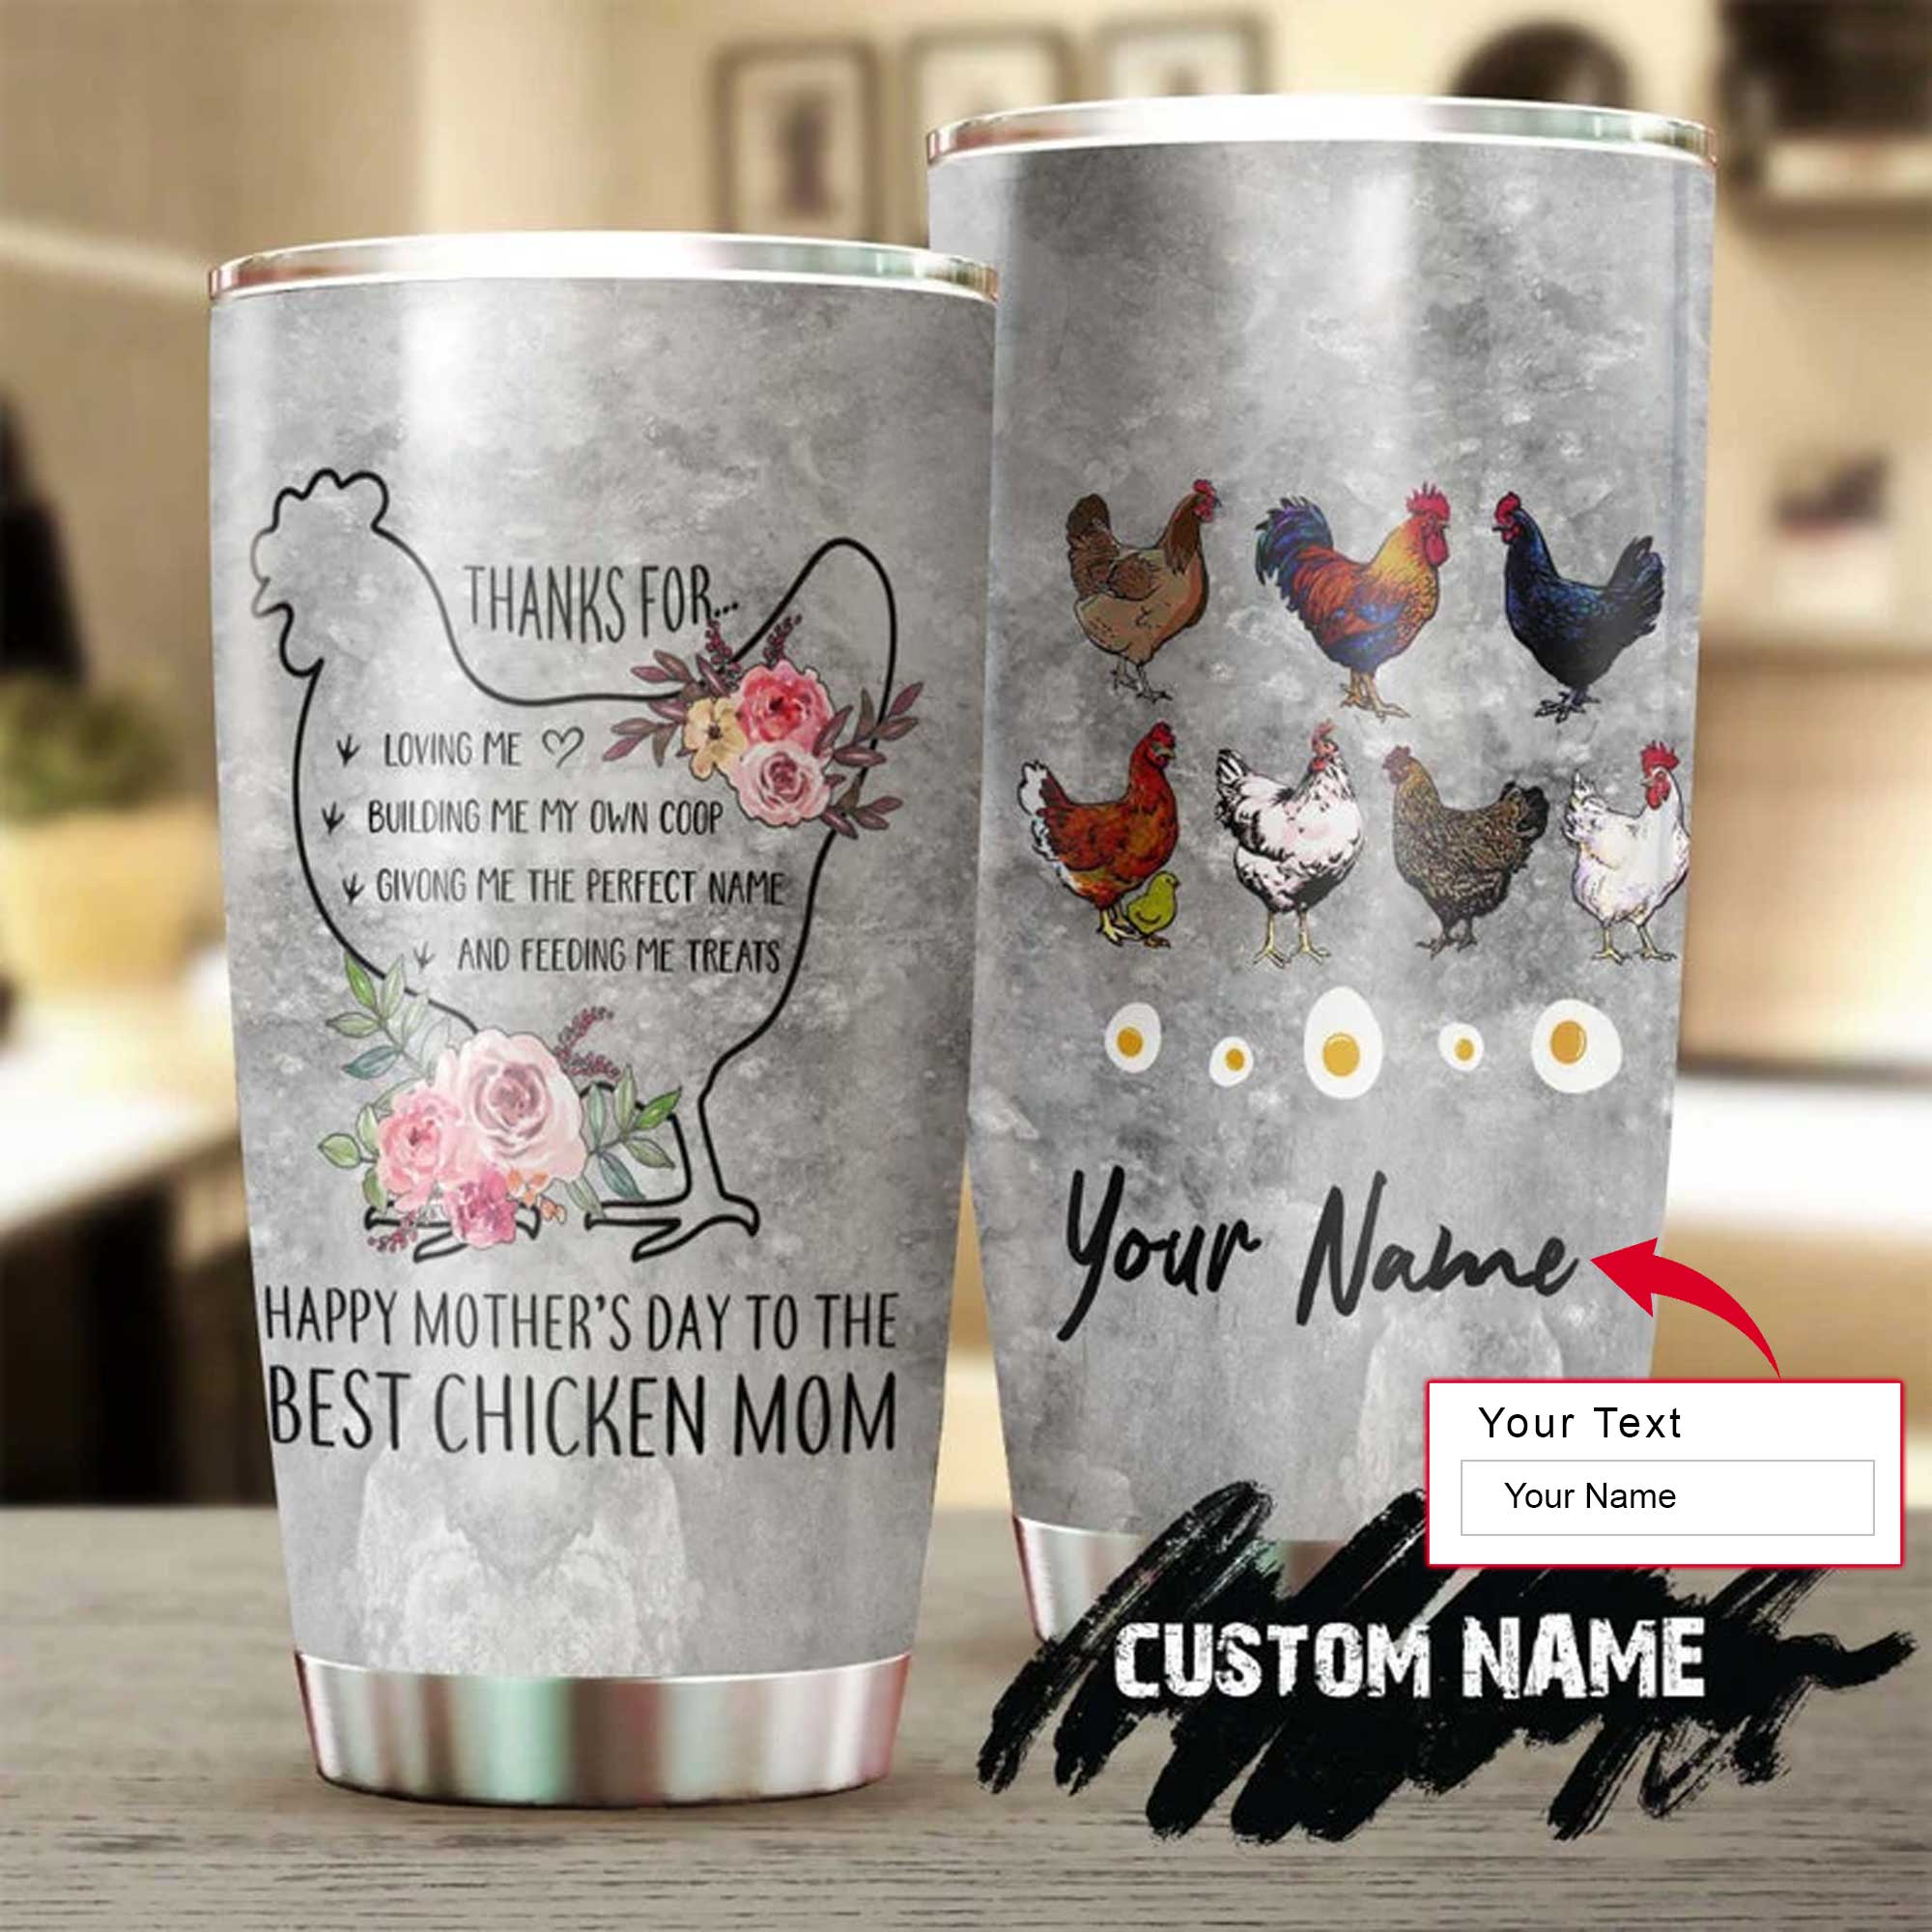 Personalized Mother's Day Gift Tumbler - Custom Gift For Mother's Day, Presents for Mom - The Best Chicken Mom, Thanks For Loving Me Tumbler